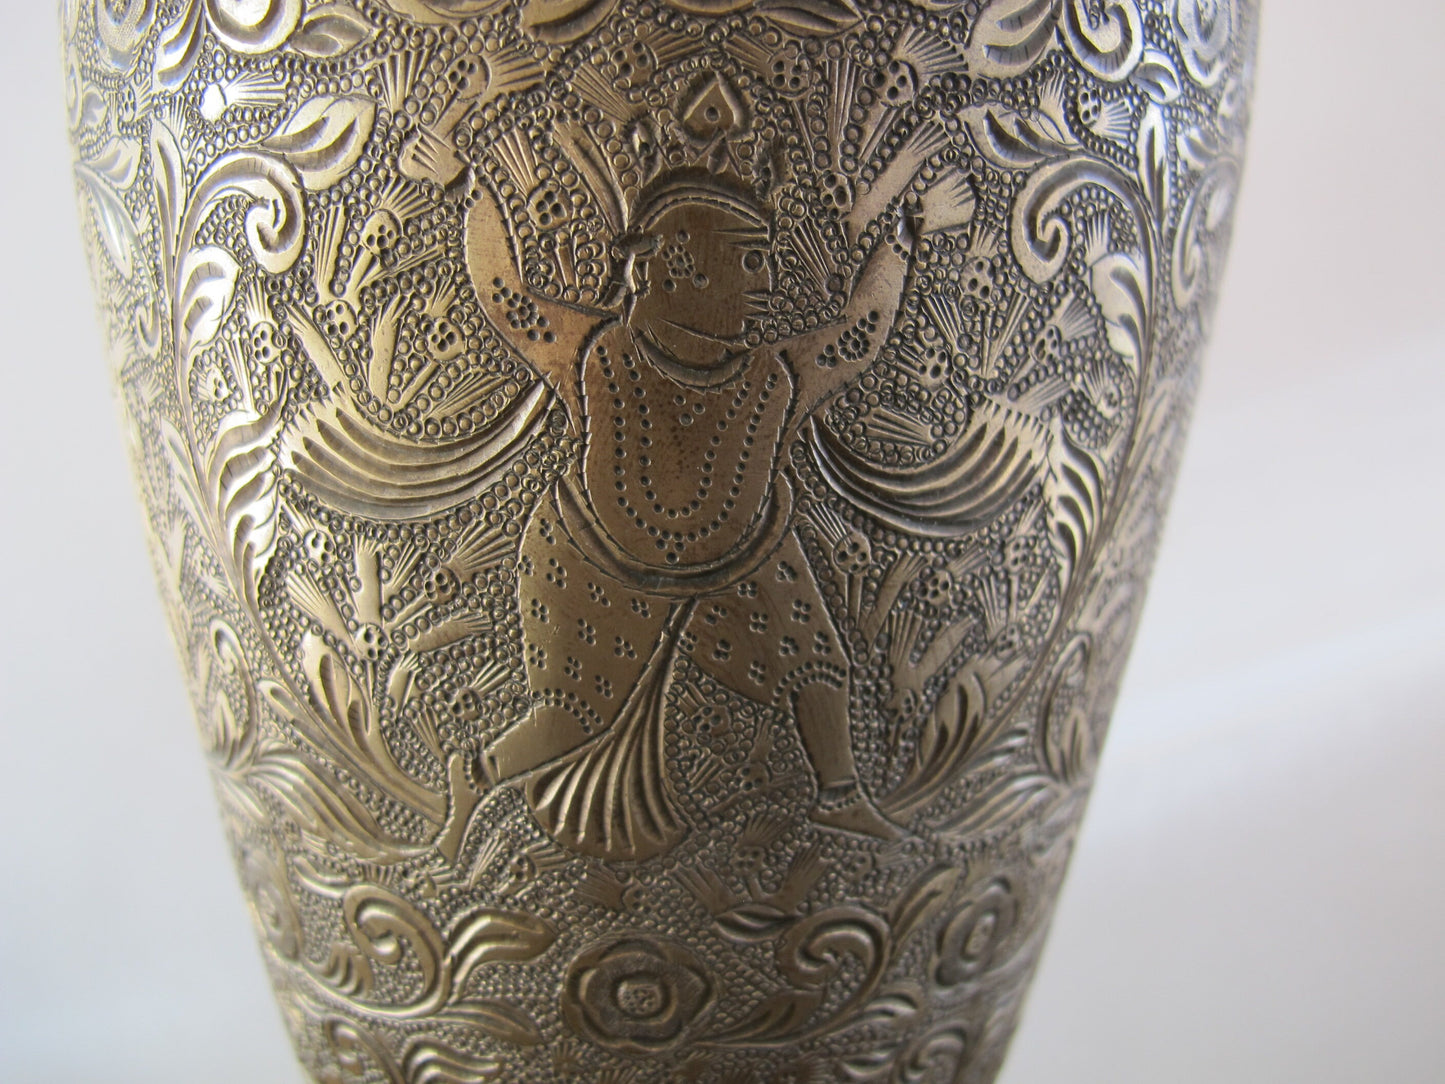 Urn Bronze Alloy Chased Engraved South Asia Anglo Indian Vase Lamp Museum Accession Number Dancing Men Birds Fish Foliage Jungle